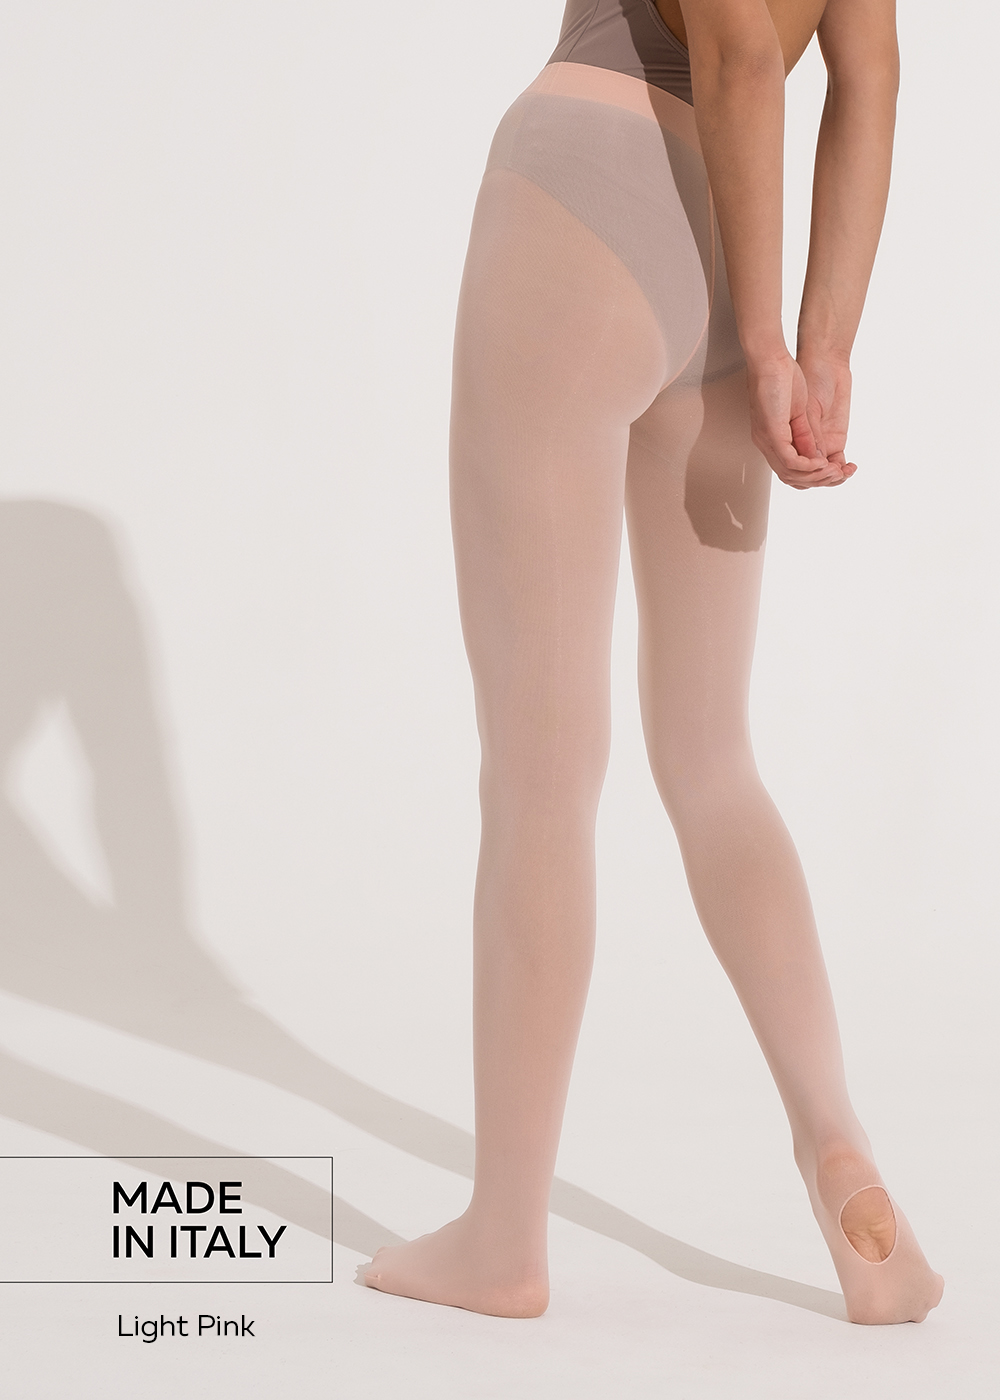 Convertible microfiber tights (0050/0N)  Nikolay® - official online shop  of pointe shoes and dance apparel in the USA